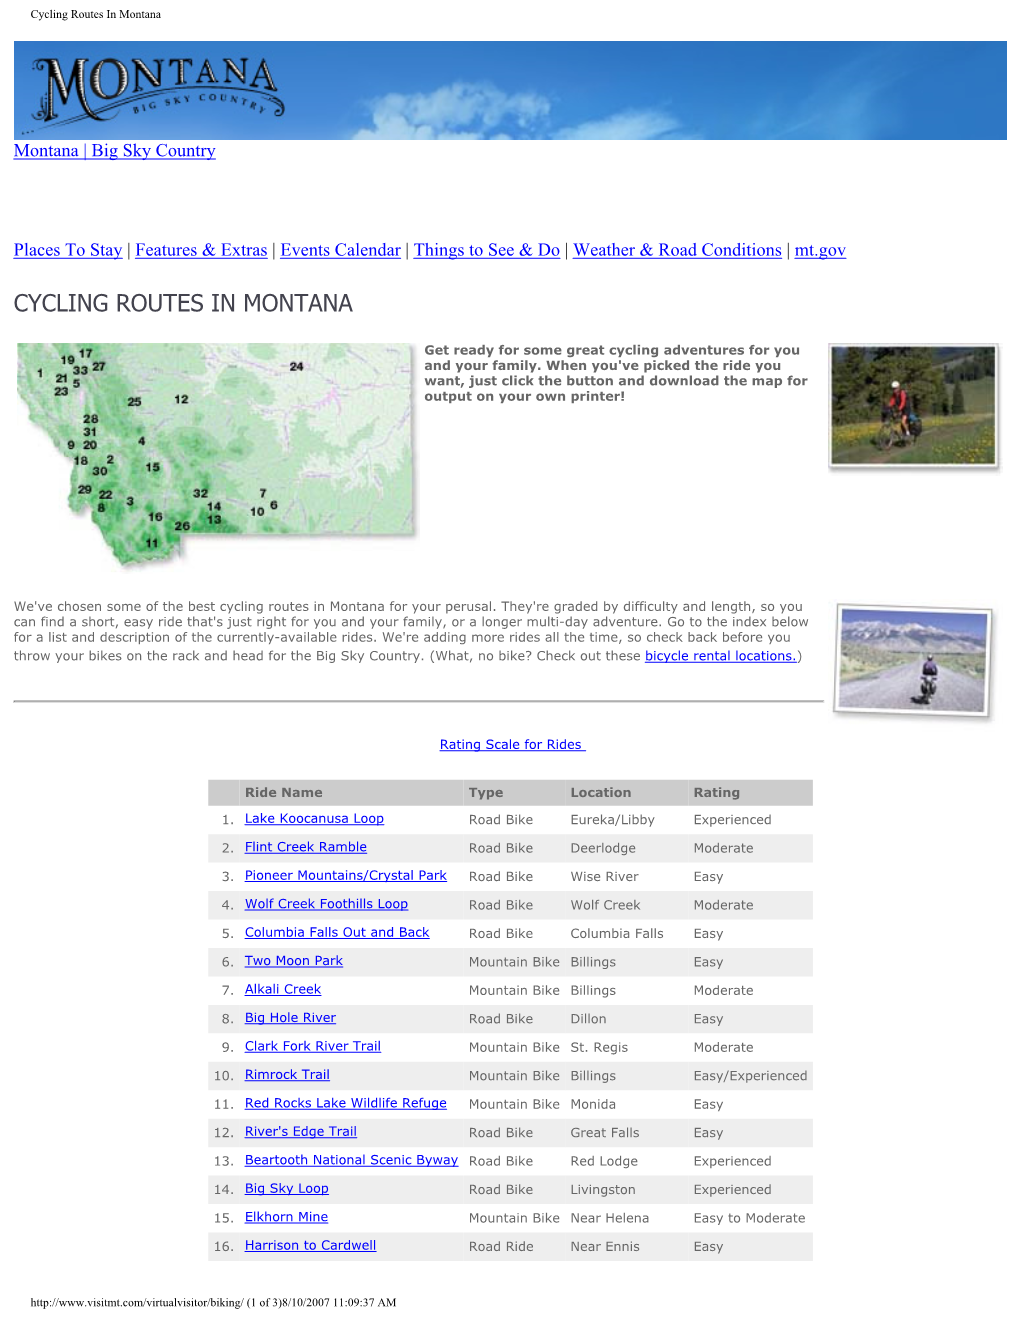 Cycling Routes in Montana